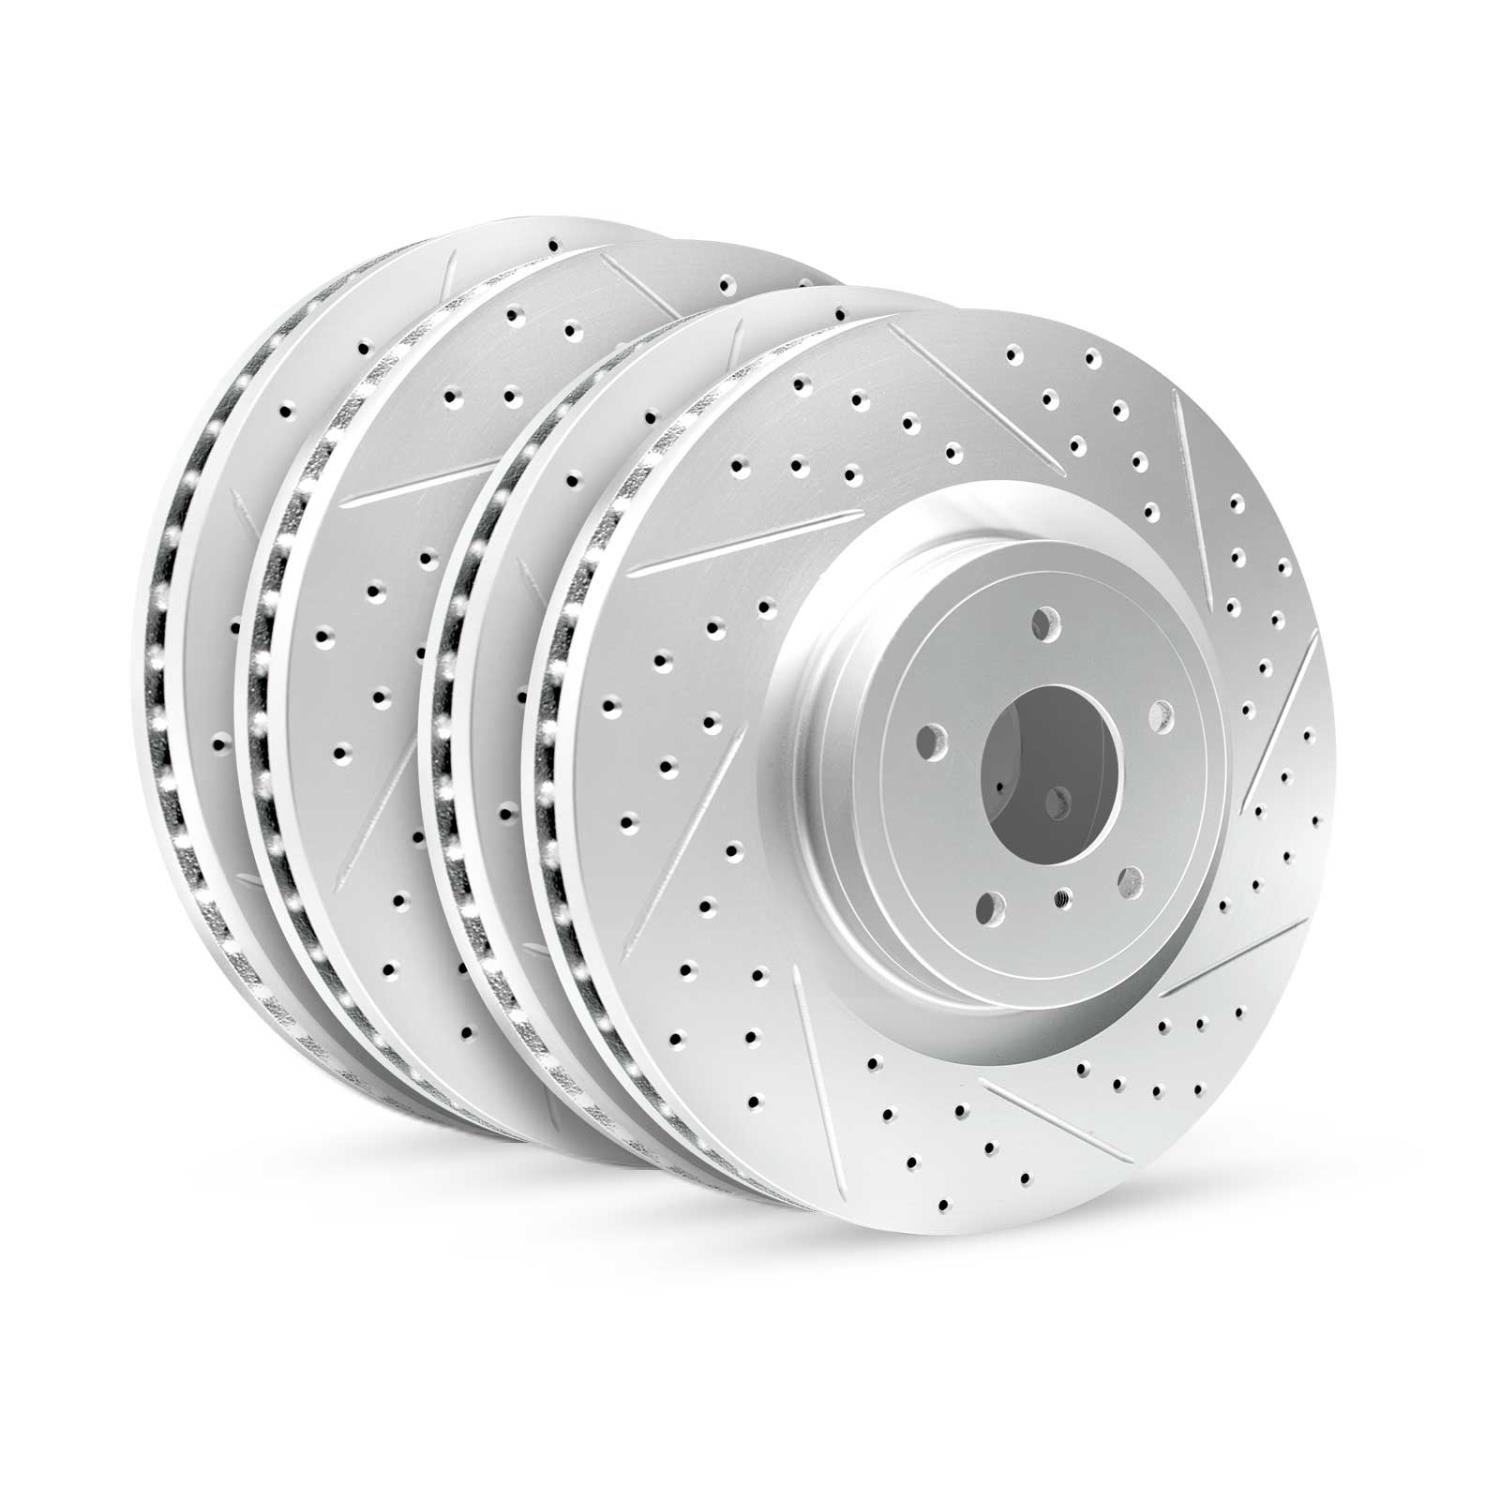 GEO-Carbon Drilled/Slotted Rotors, 2005-2007 Land Rover, Position: Front/Rear